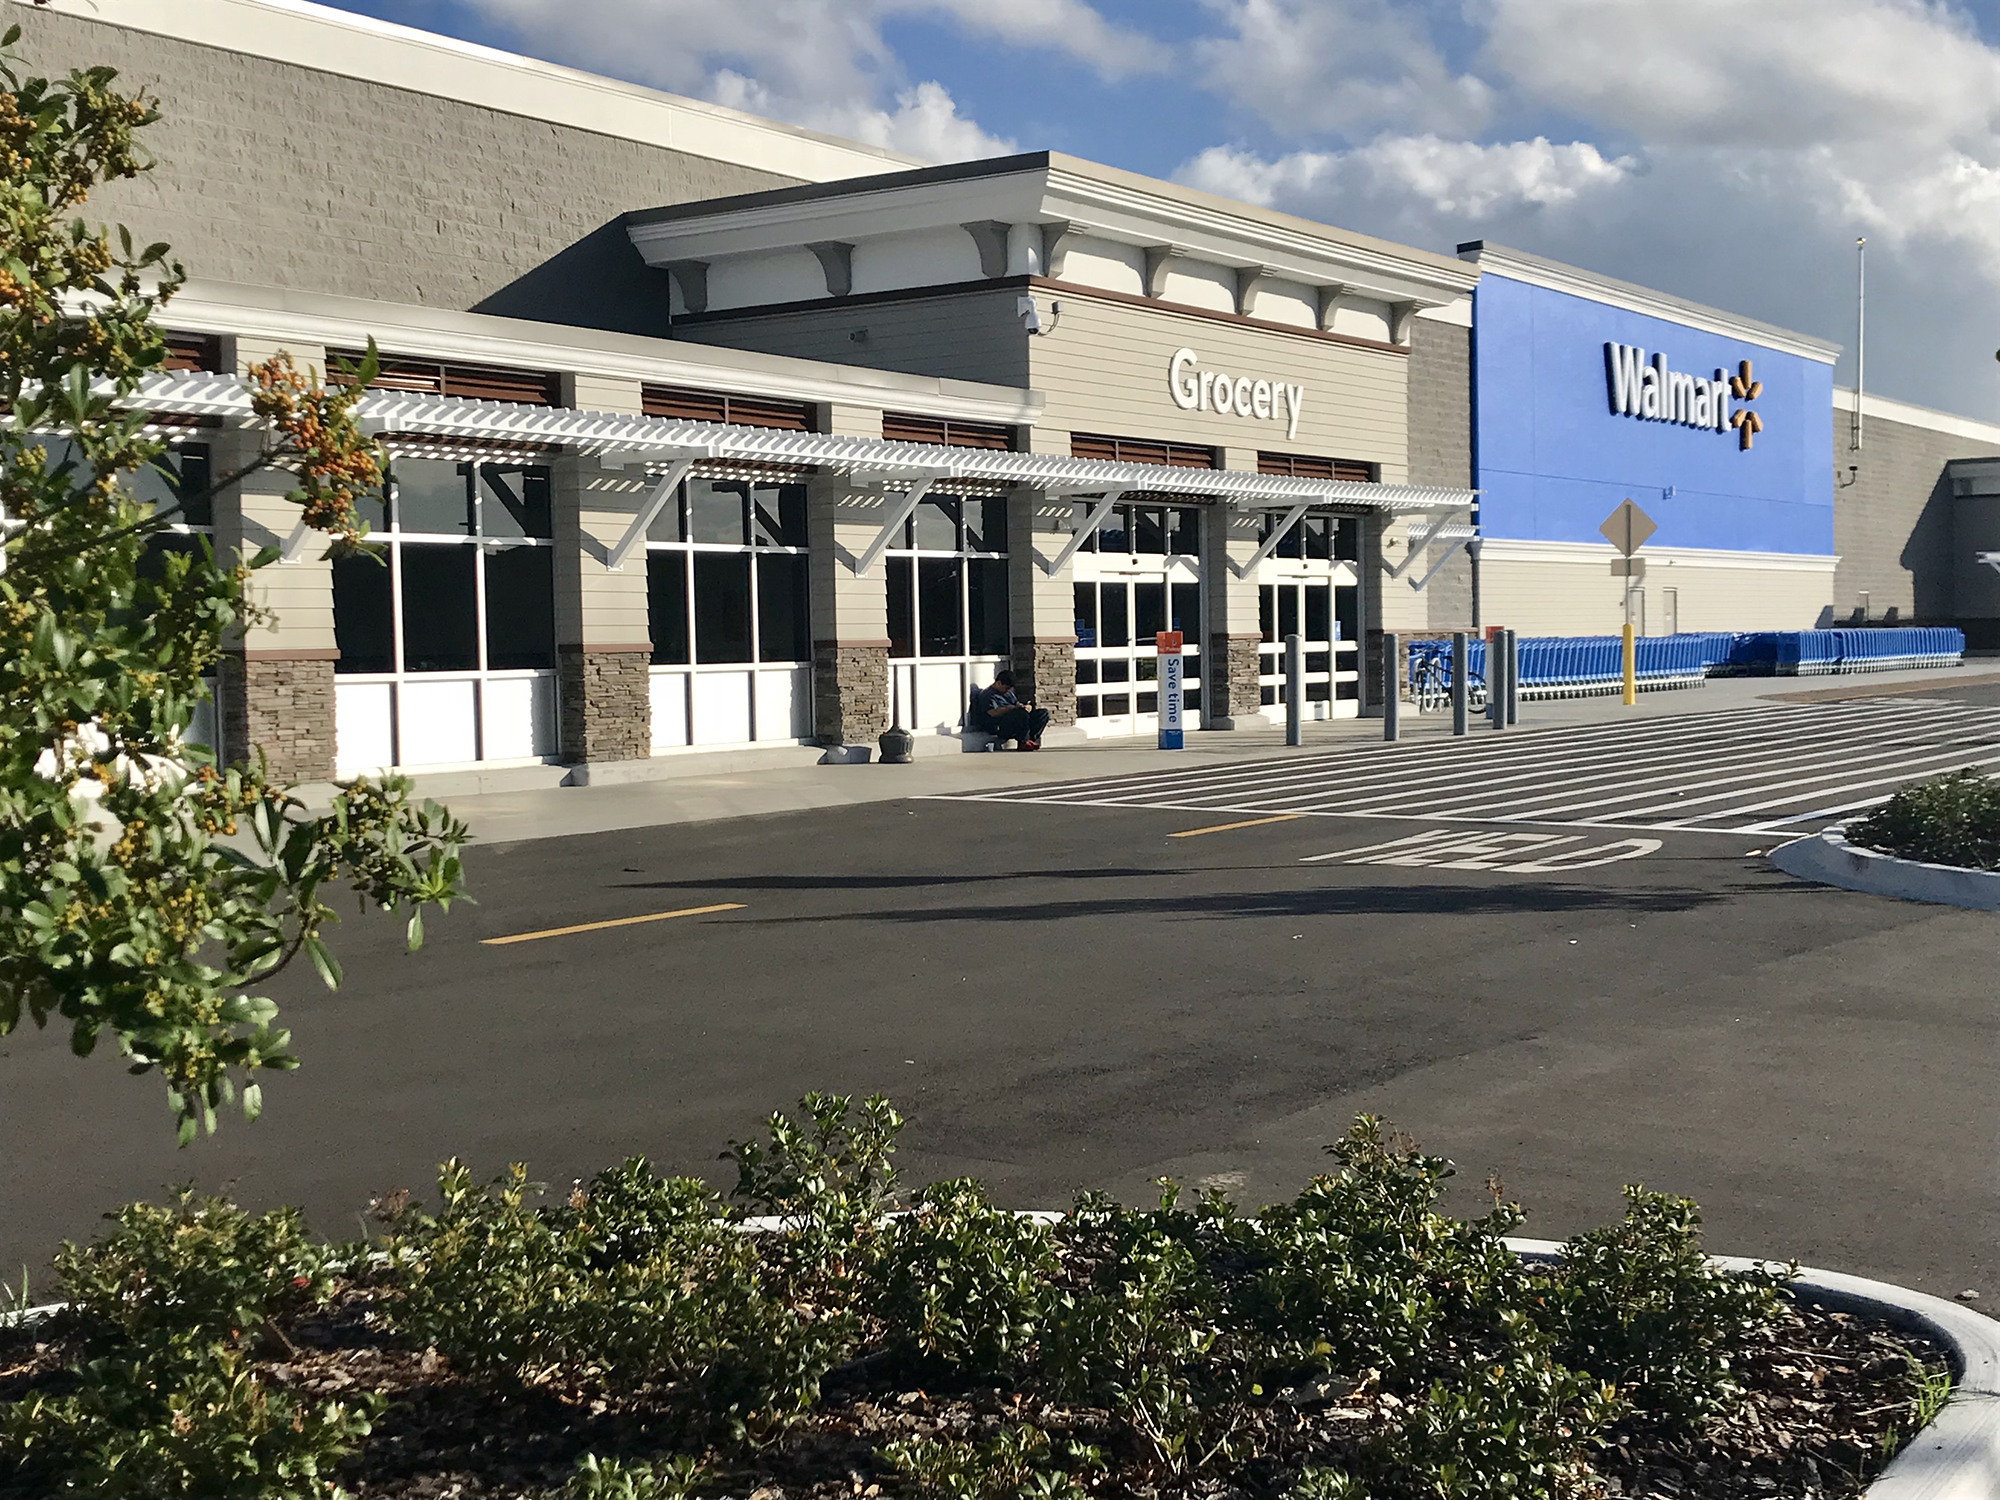 The first phase of The Pavilion at Durbin Park brought a new Walmart Supercenter.